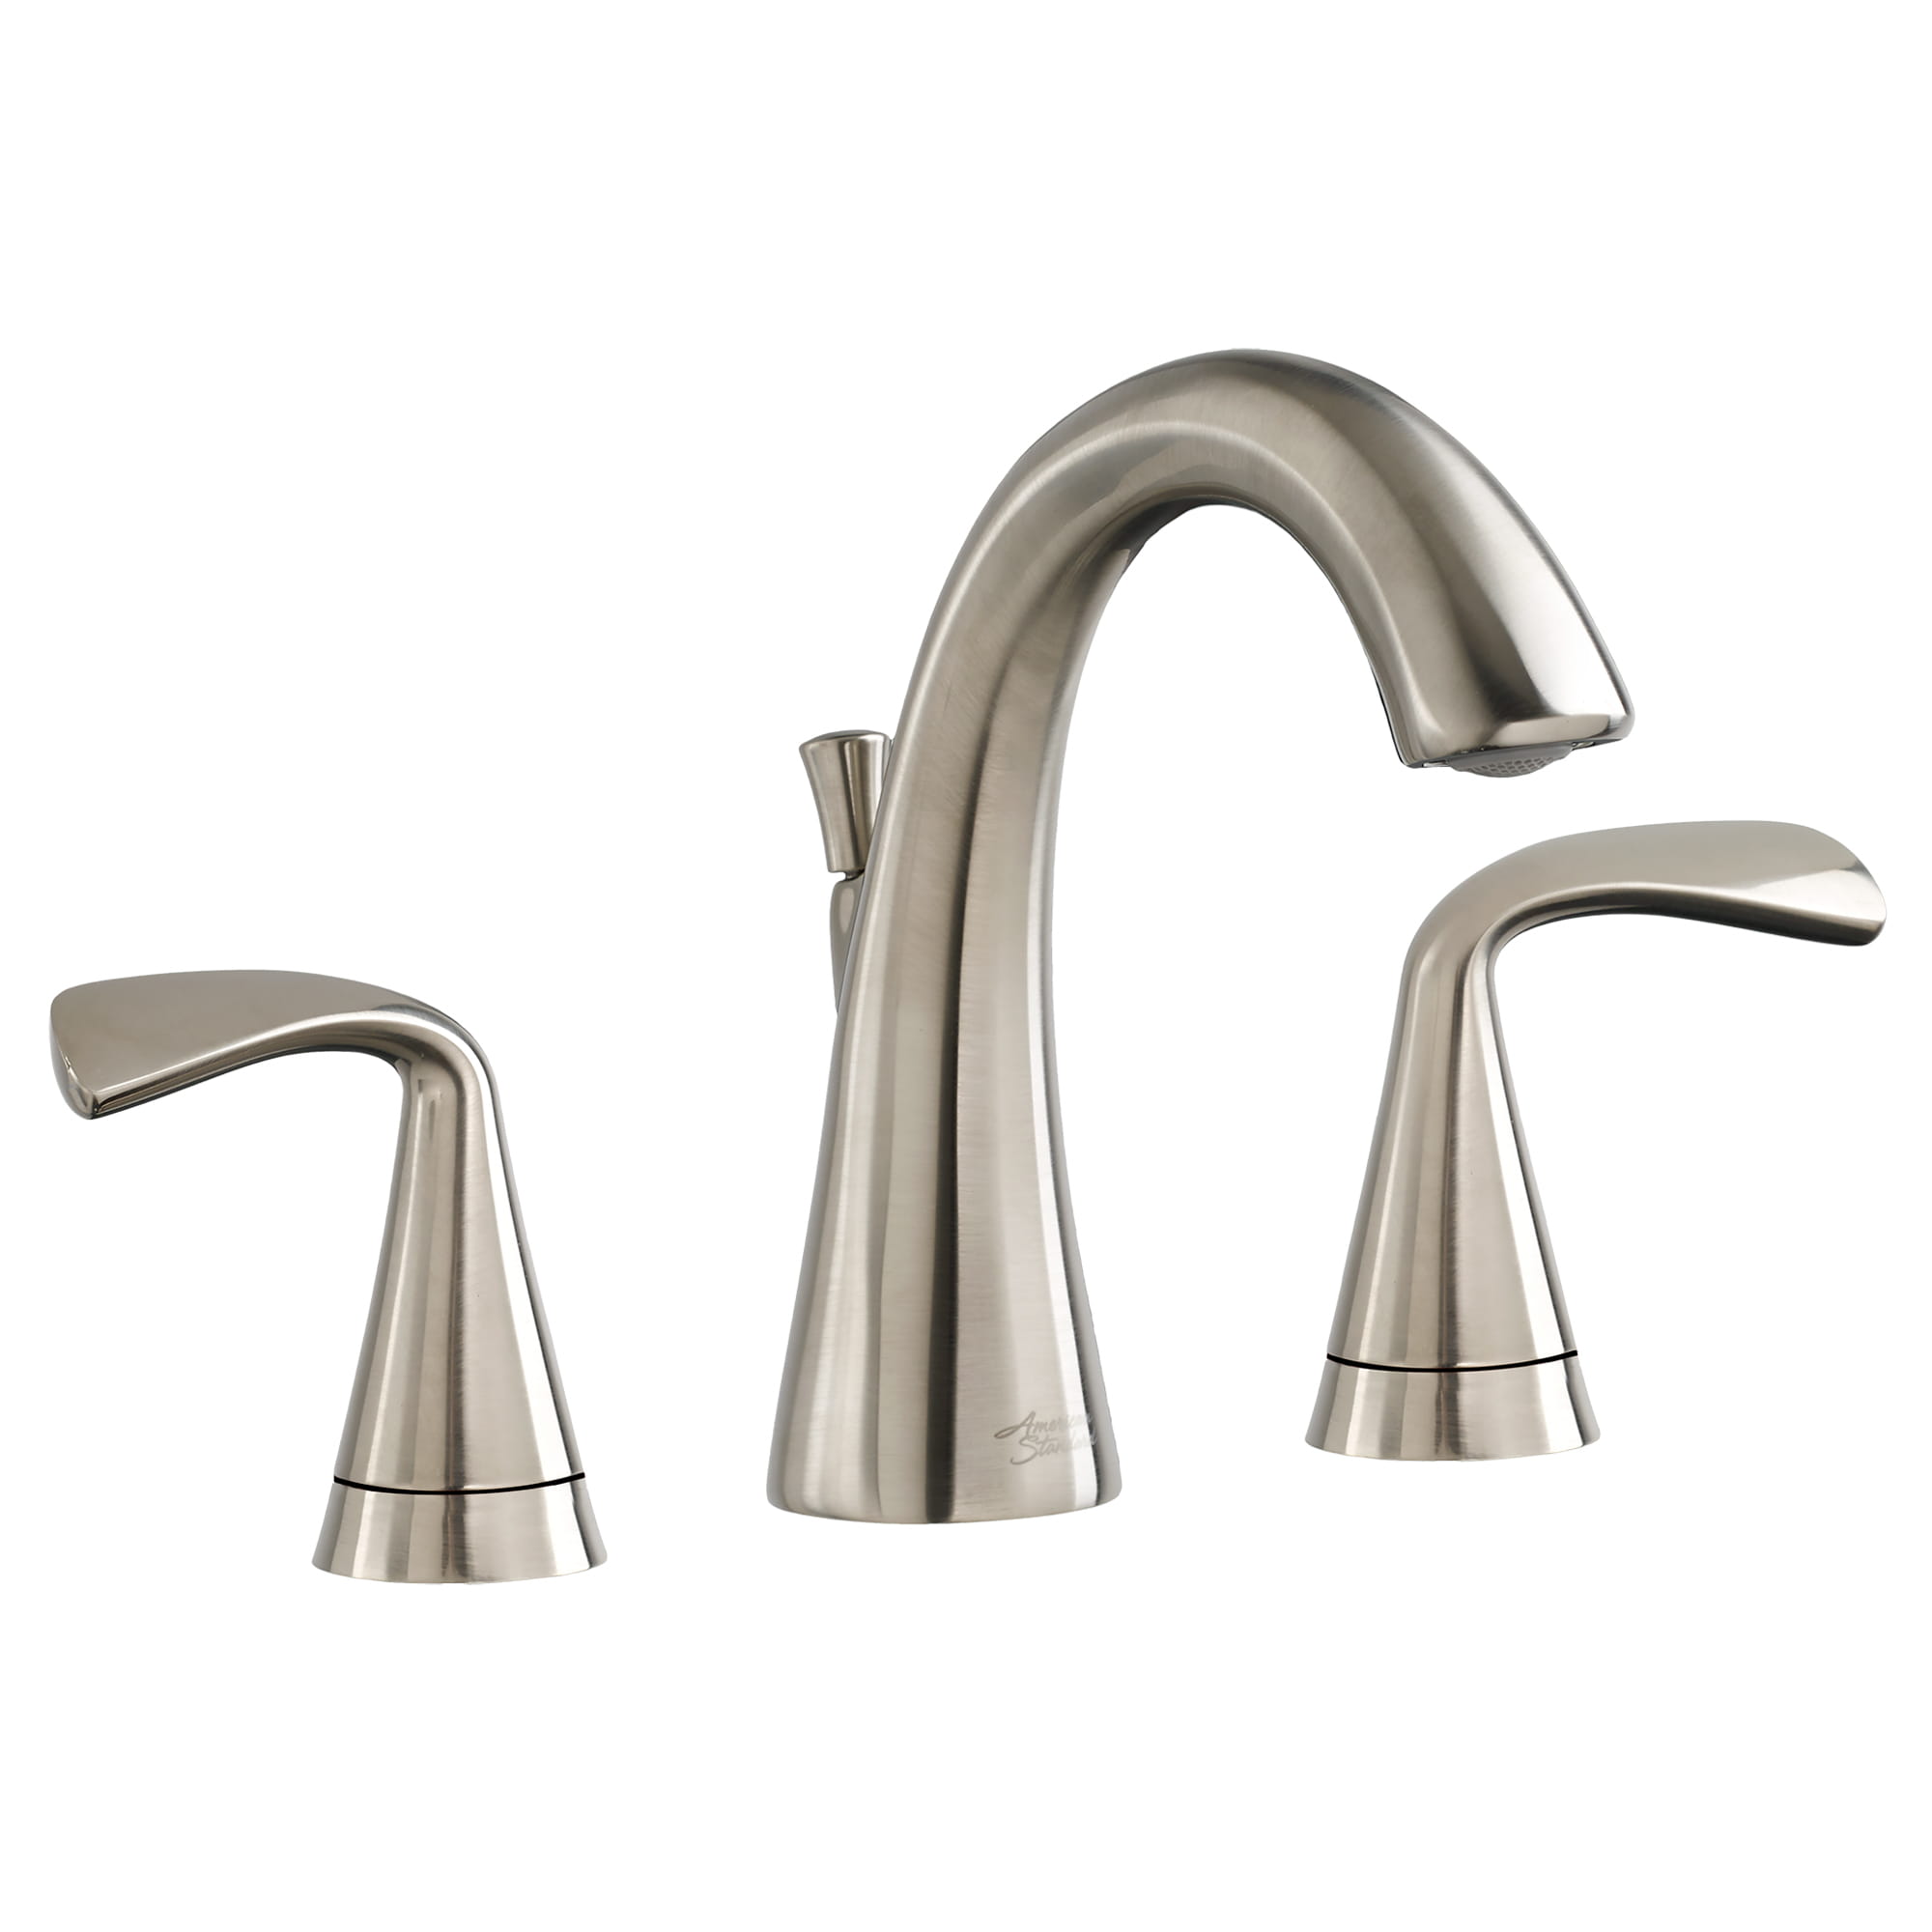 Fluent 8 Inch Widespread 2 Handle Bathroom Faucet 12 gpm 45 L min With Lever Handles   BRUSHED NICKEL